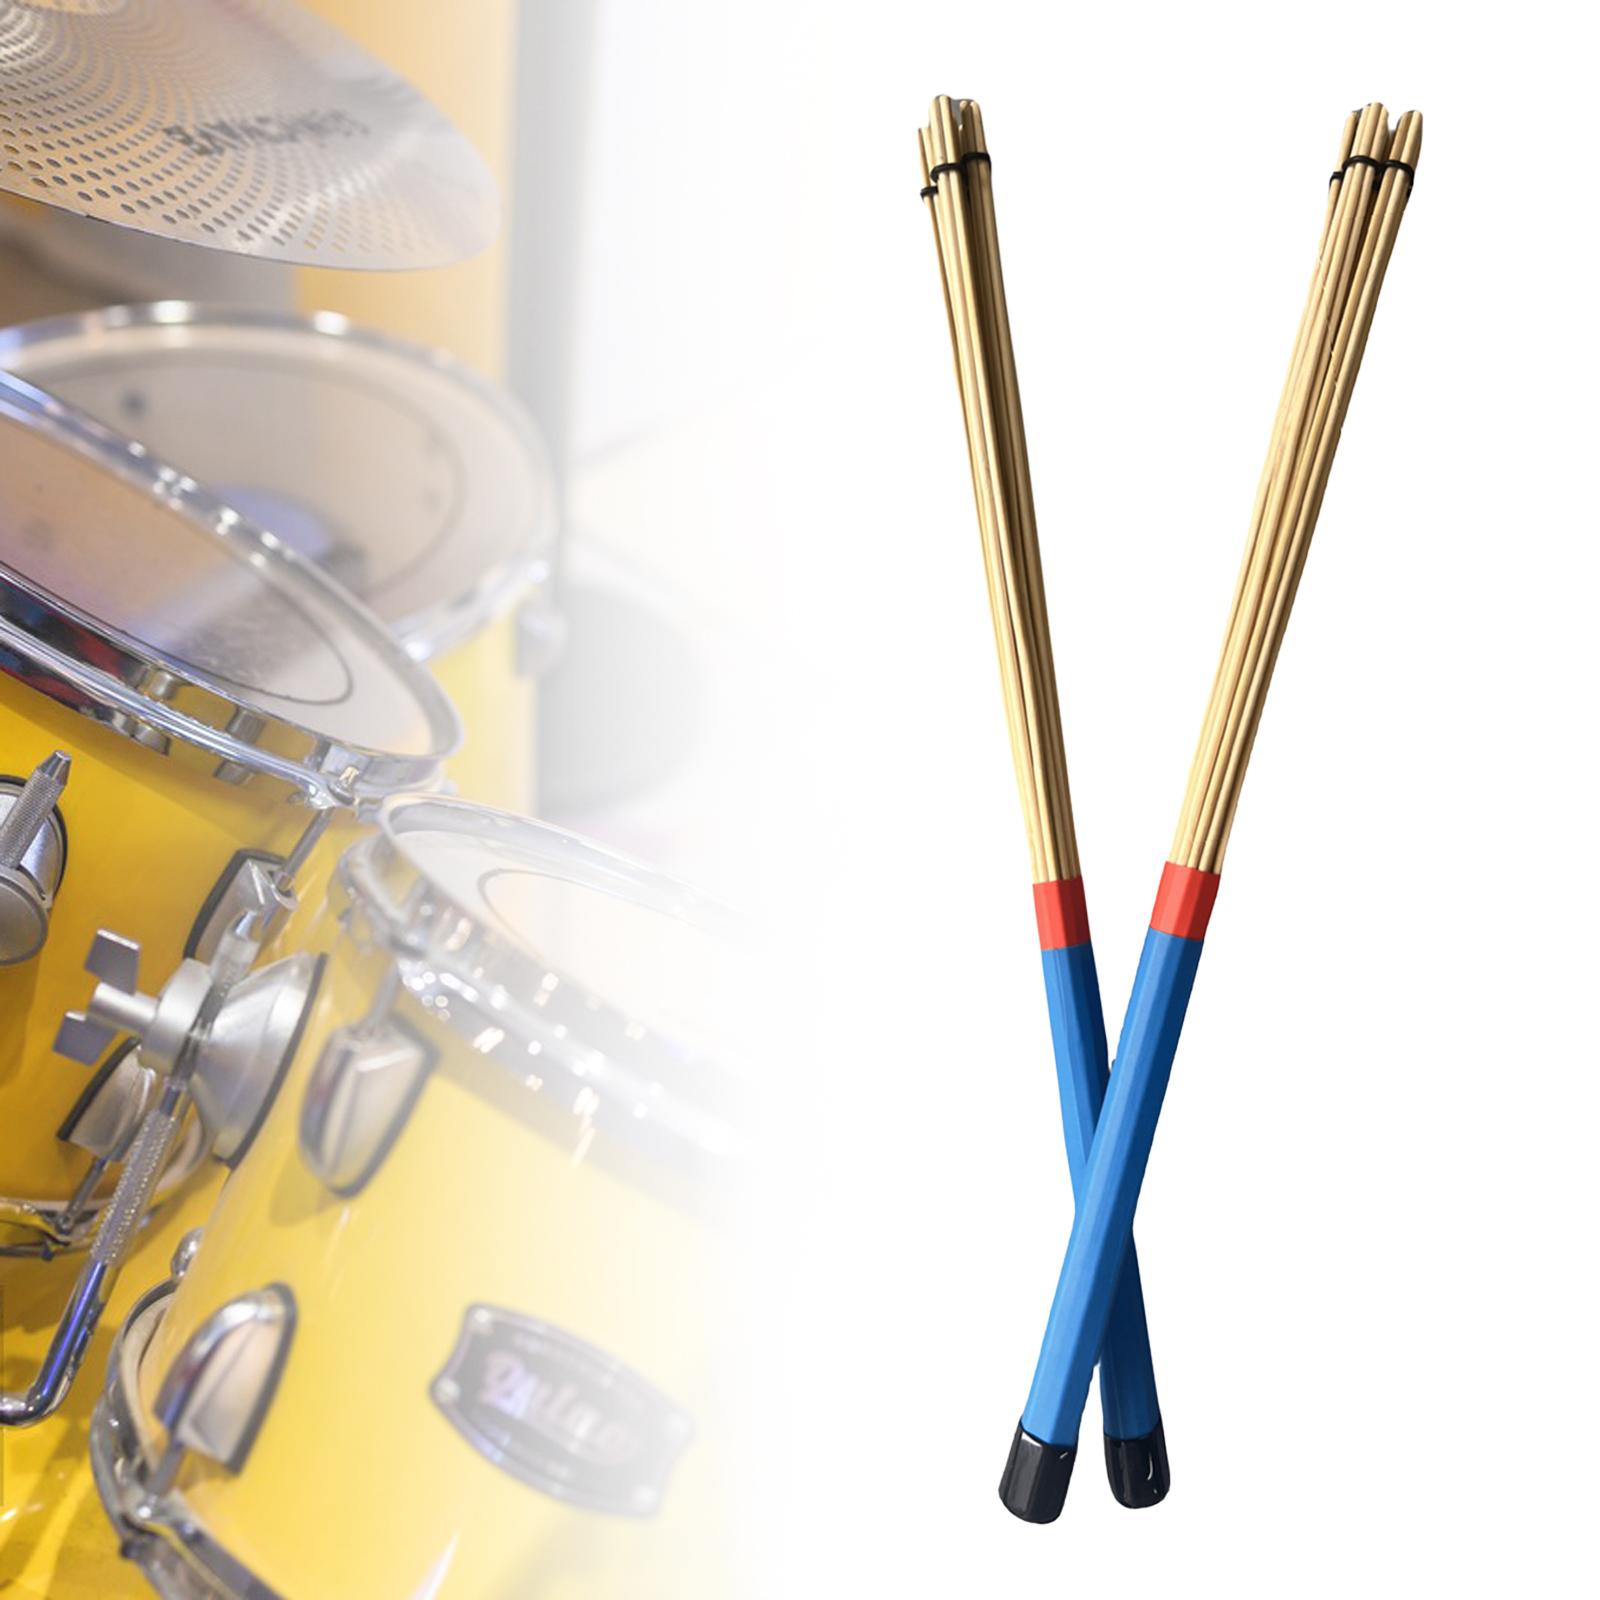 2 Pieces Bamboo Drum Stick Rods Brushes for Acoustic Performance Small Venue Blue